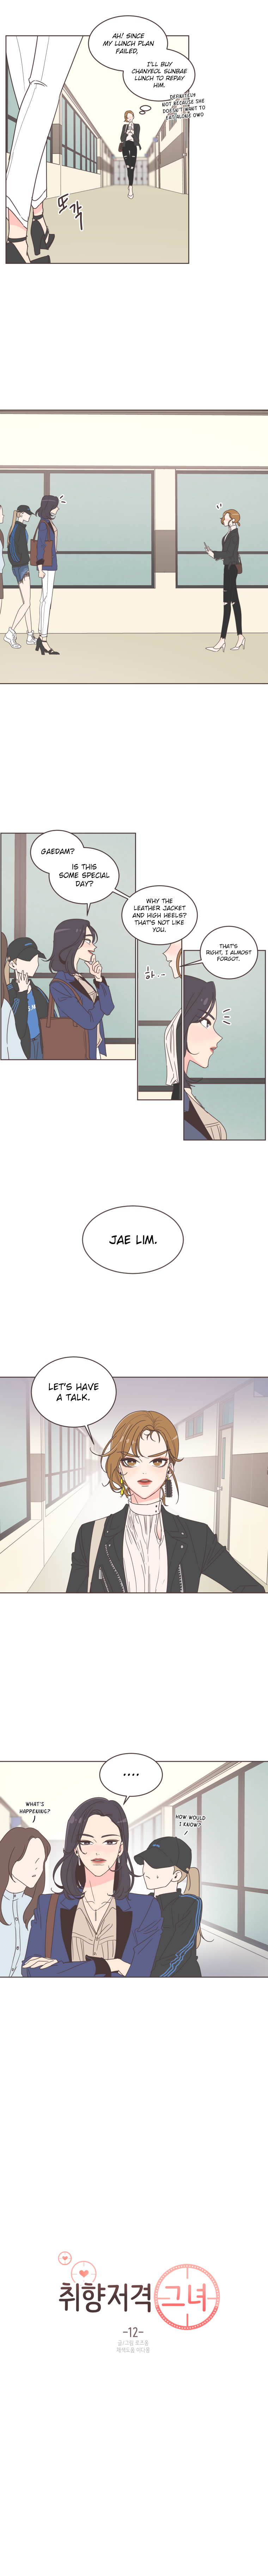 She's My Type - Chapter 12 Page 5